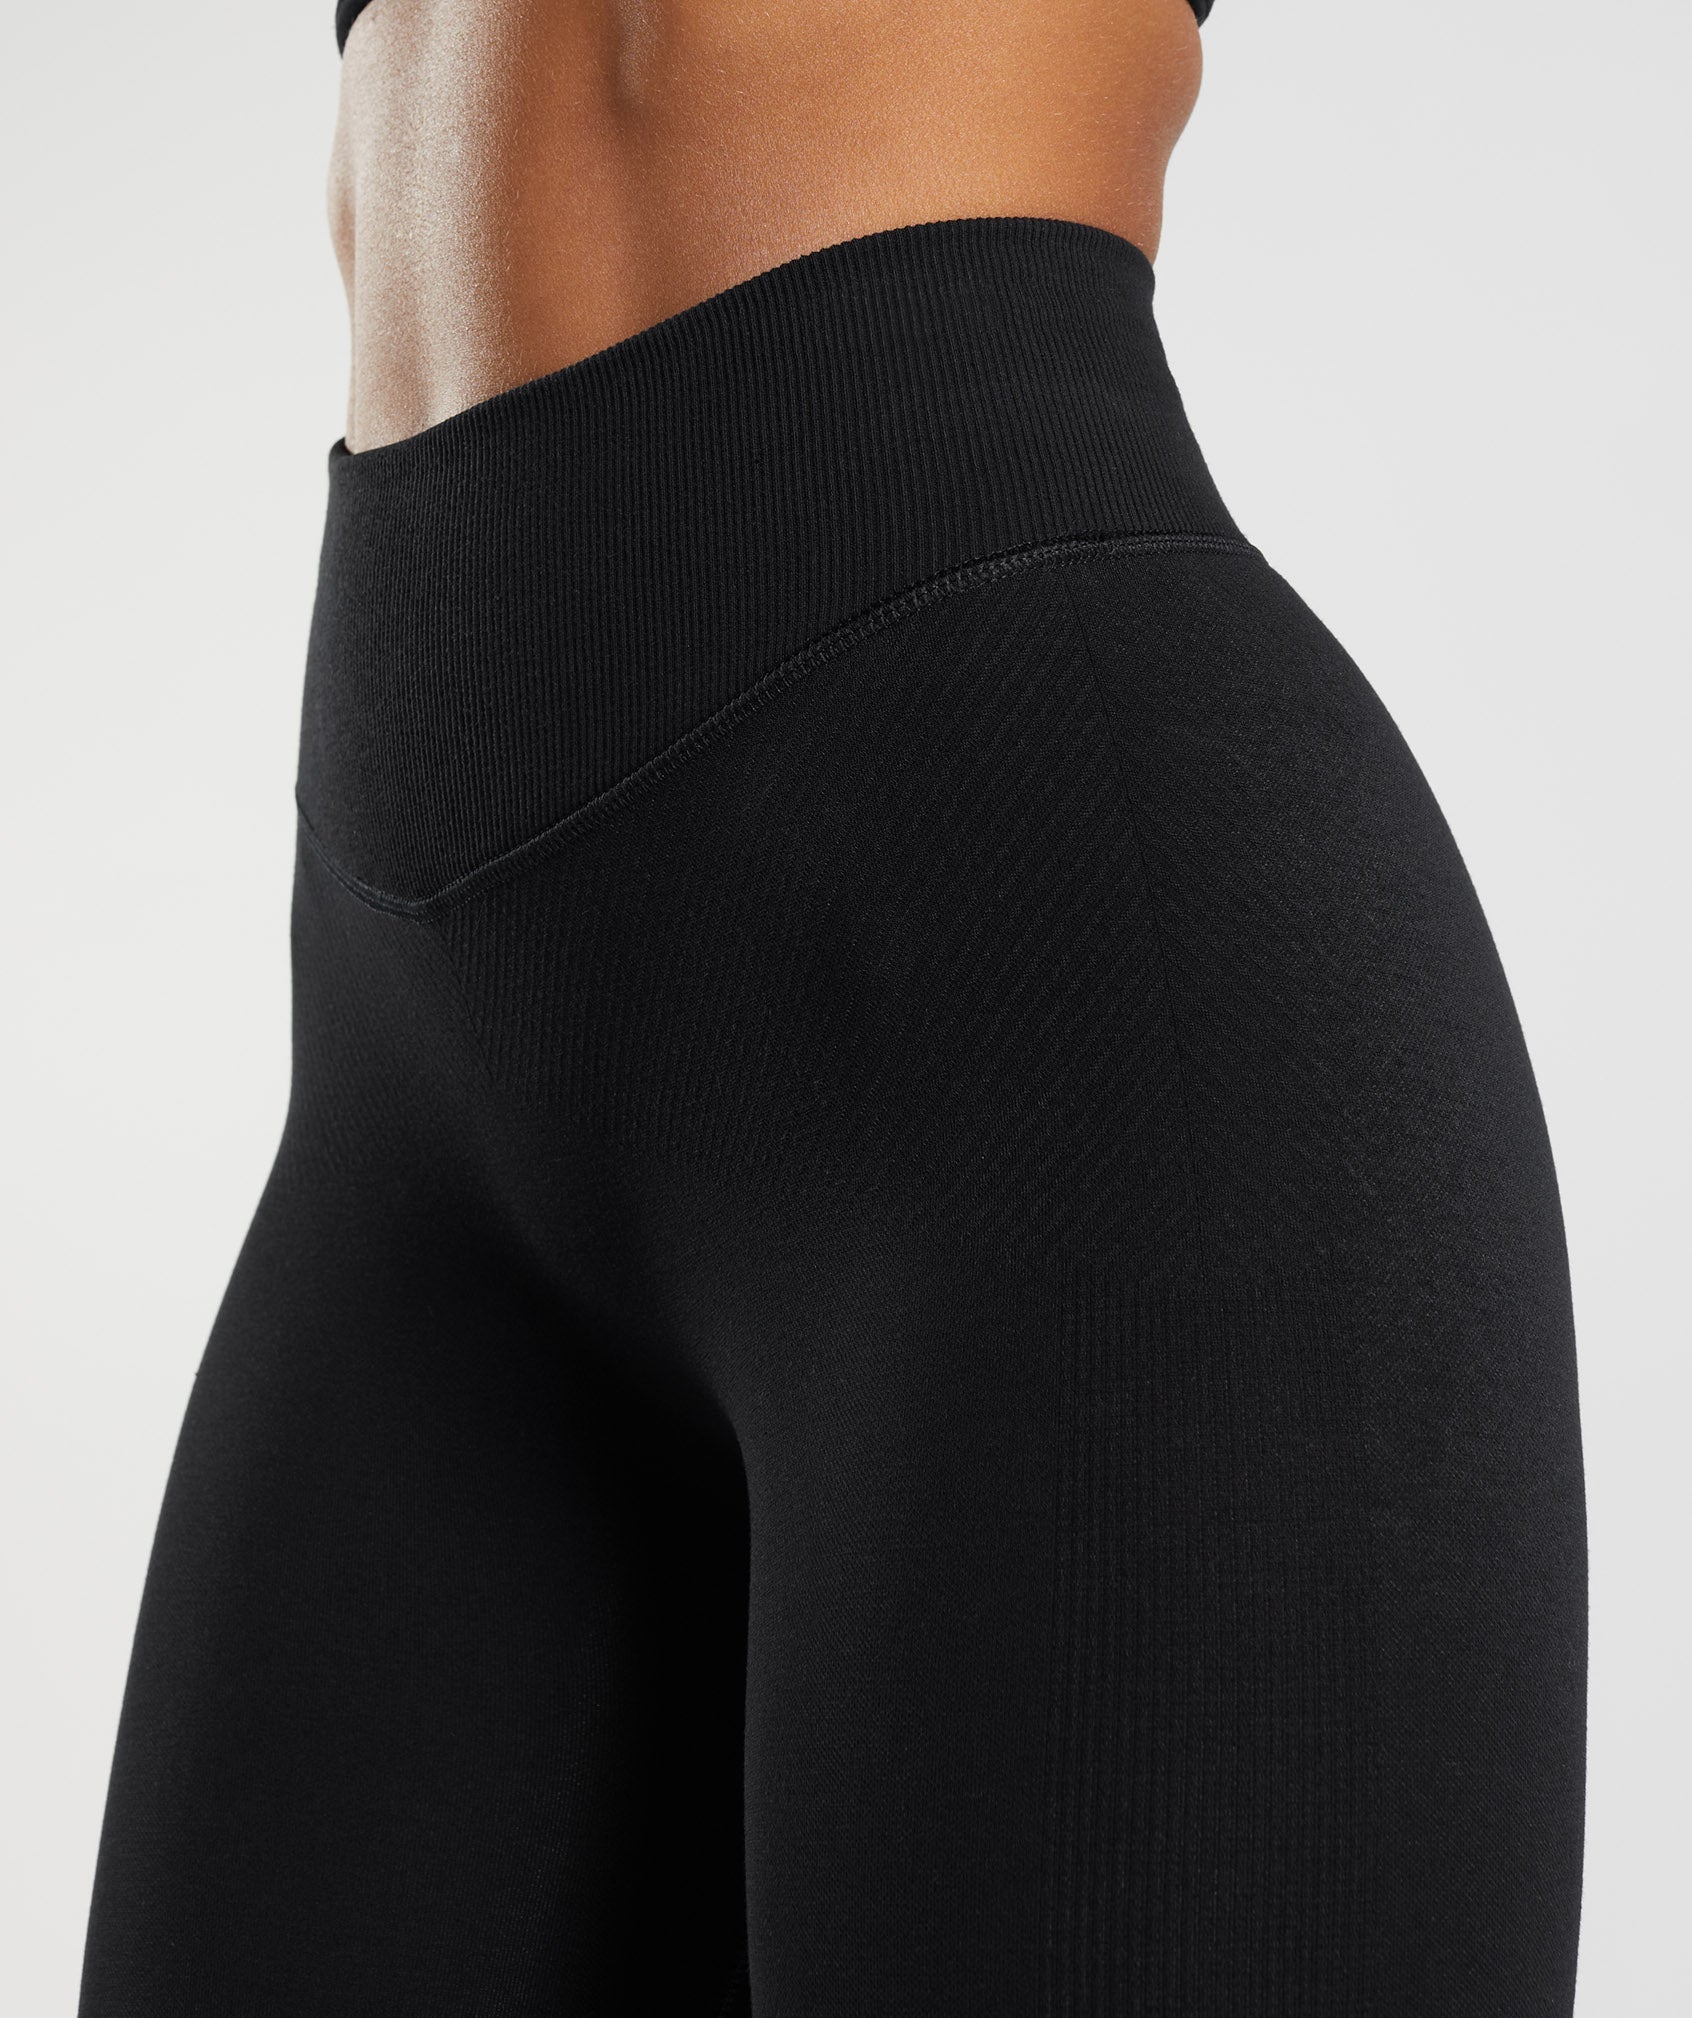 Rest Day Seamless Leggings in Black - view 6